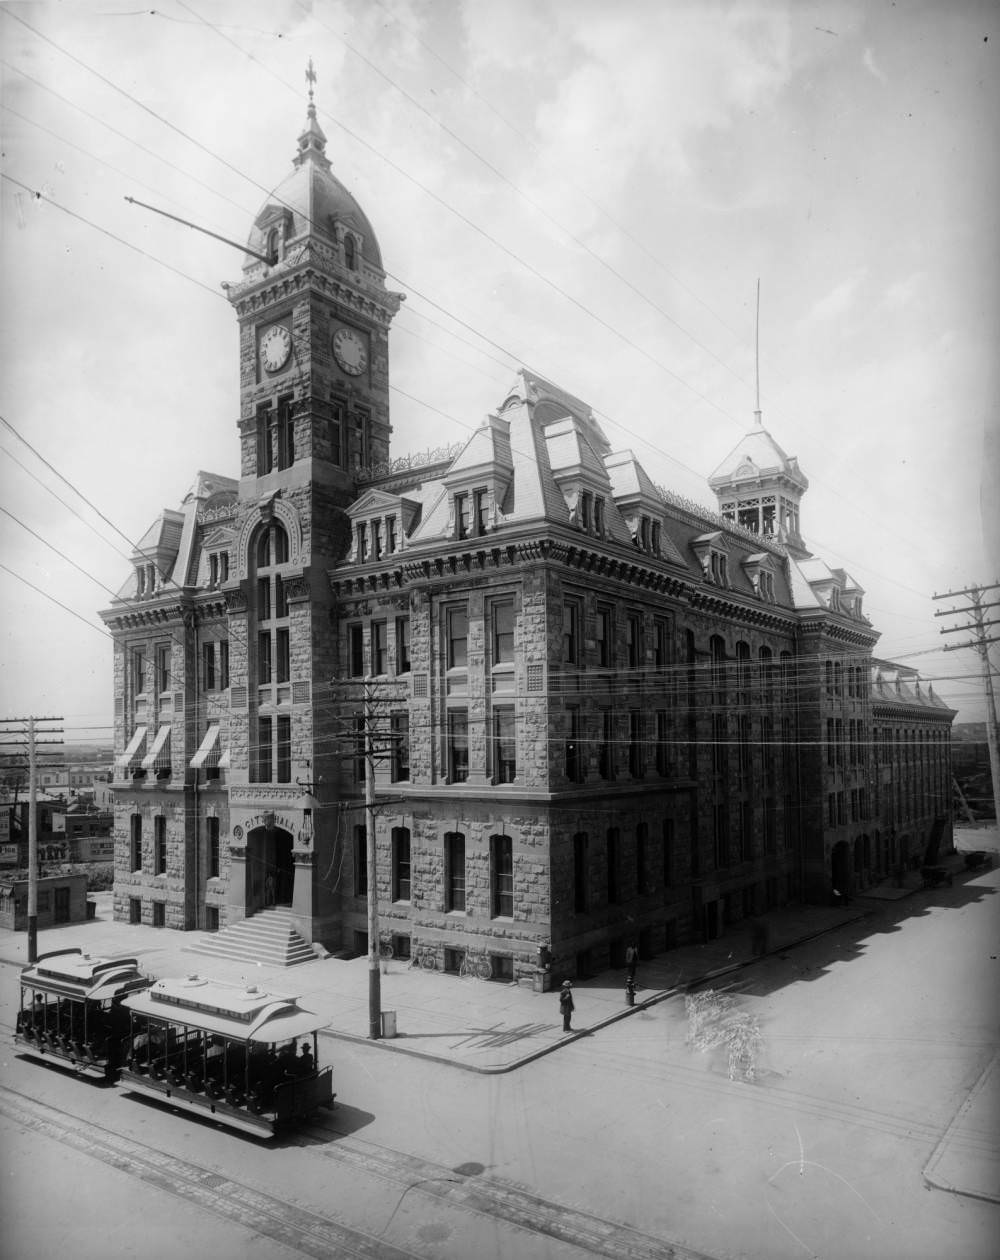 View of Denver City Hall (demolished in the late 1940's) on 14th (Fourteenth) Street in Denver, 1909